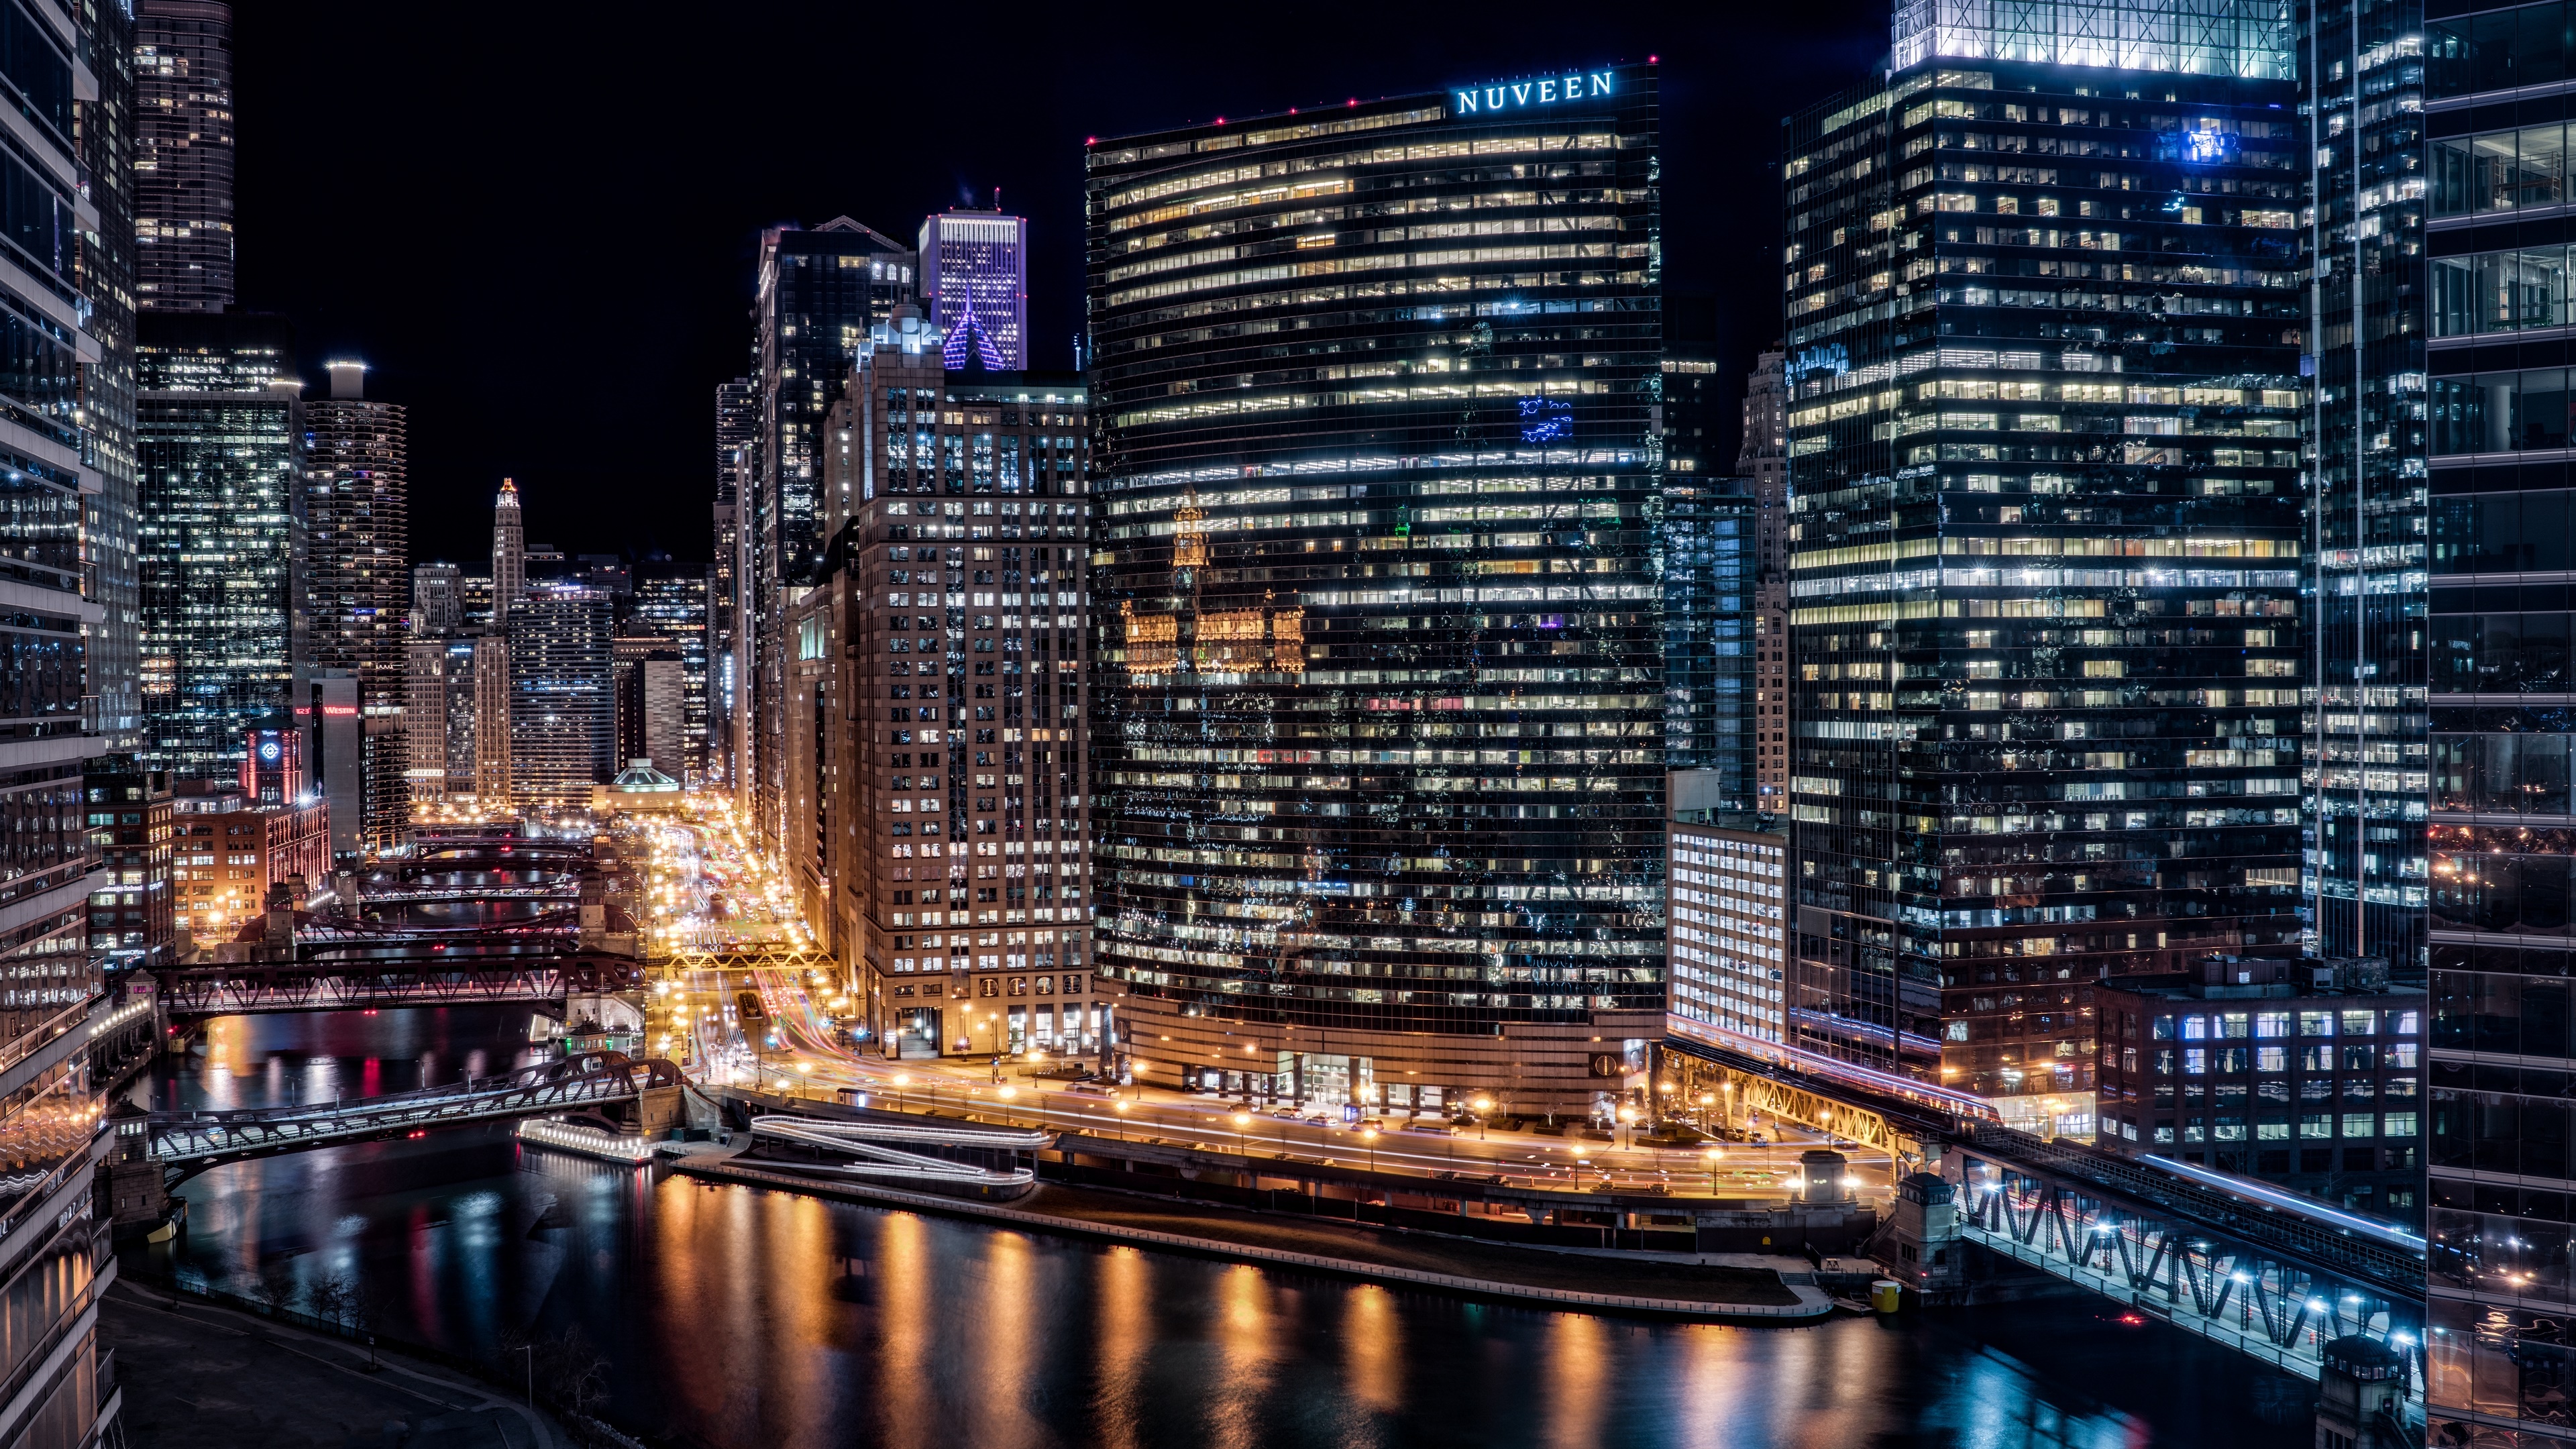 Chicago night city lights wallpaper - backiee